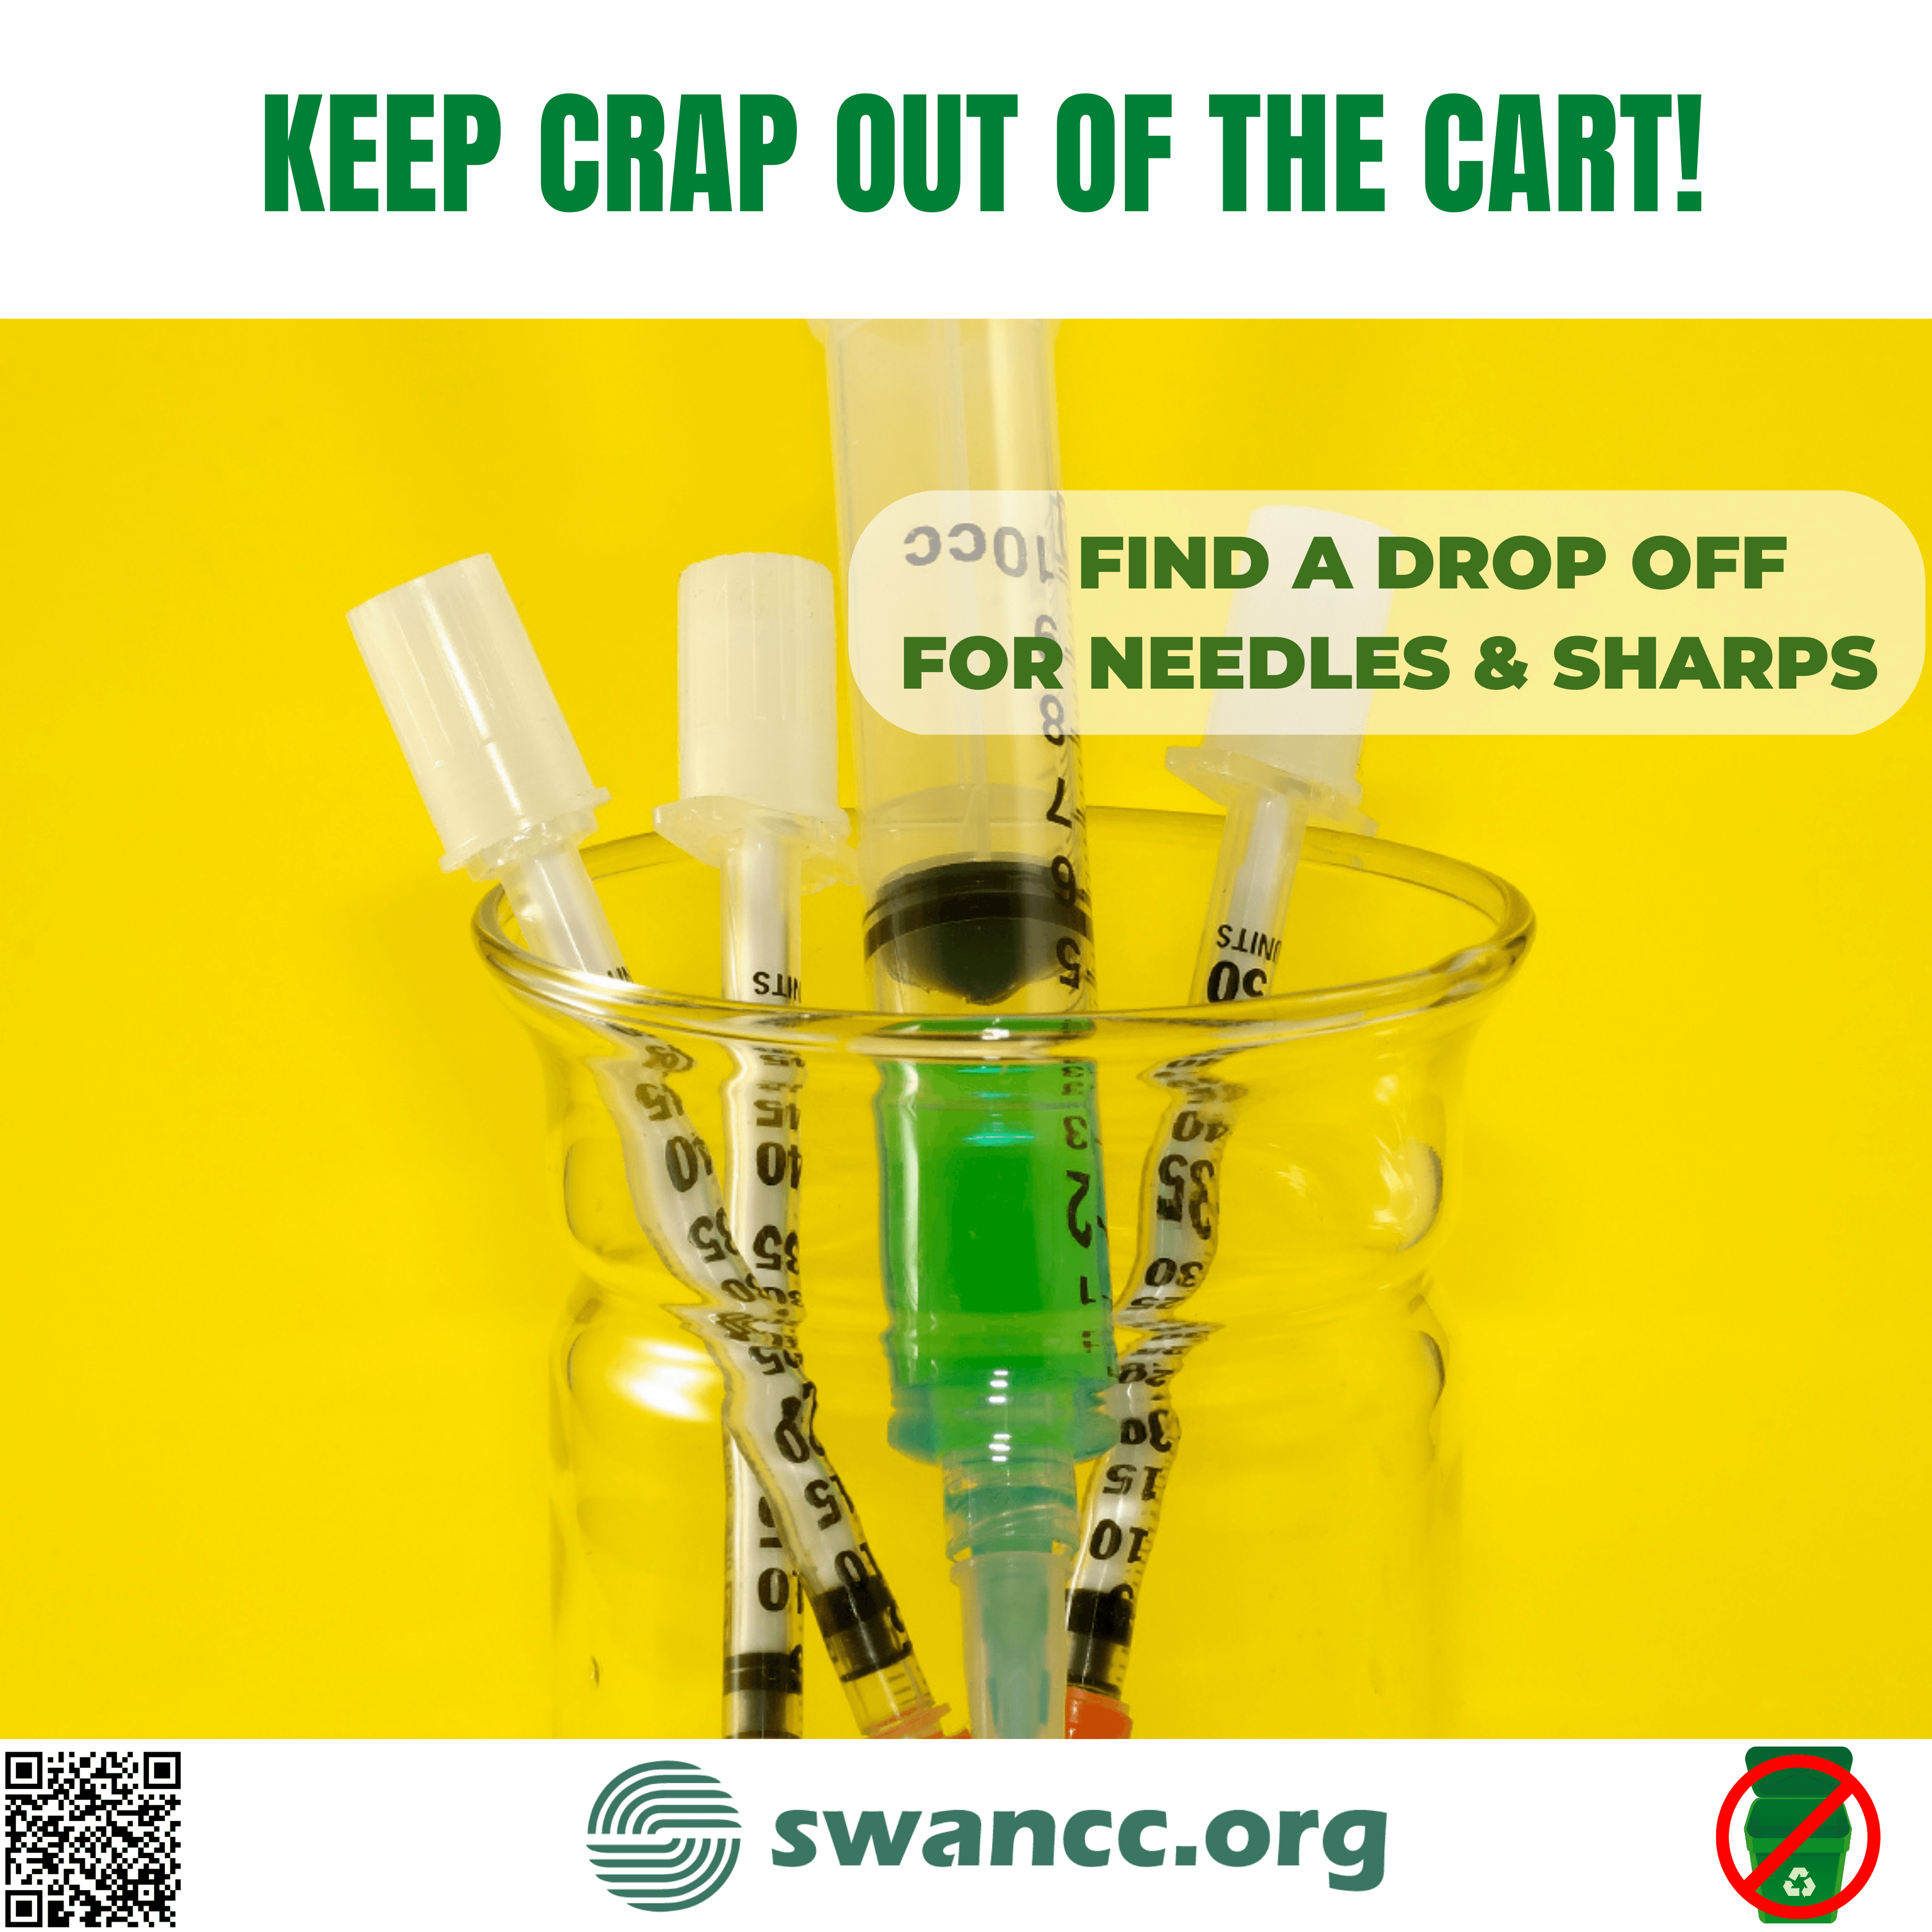 Find a Drop Off For Needles & Sharps